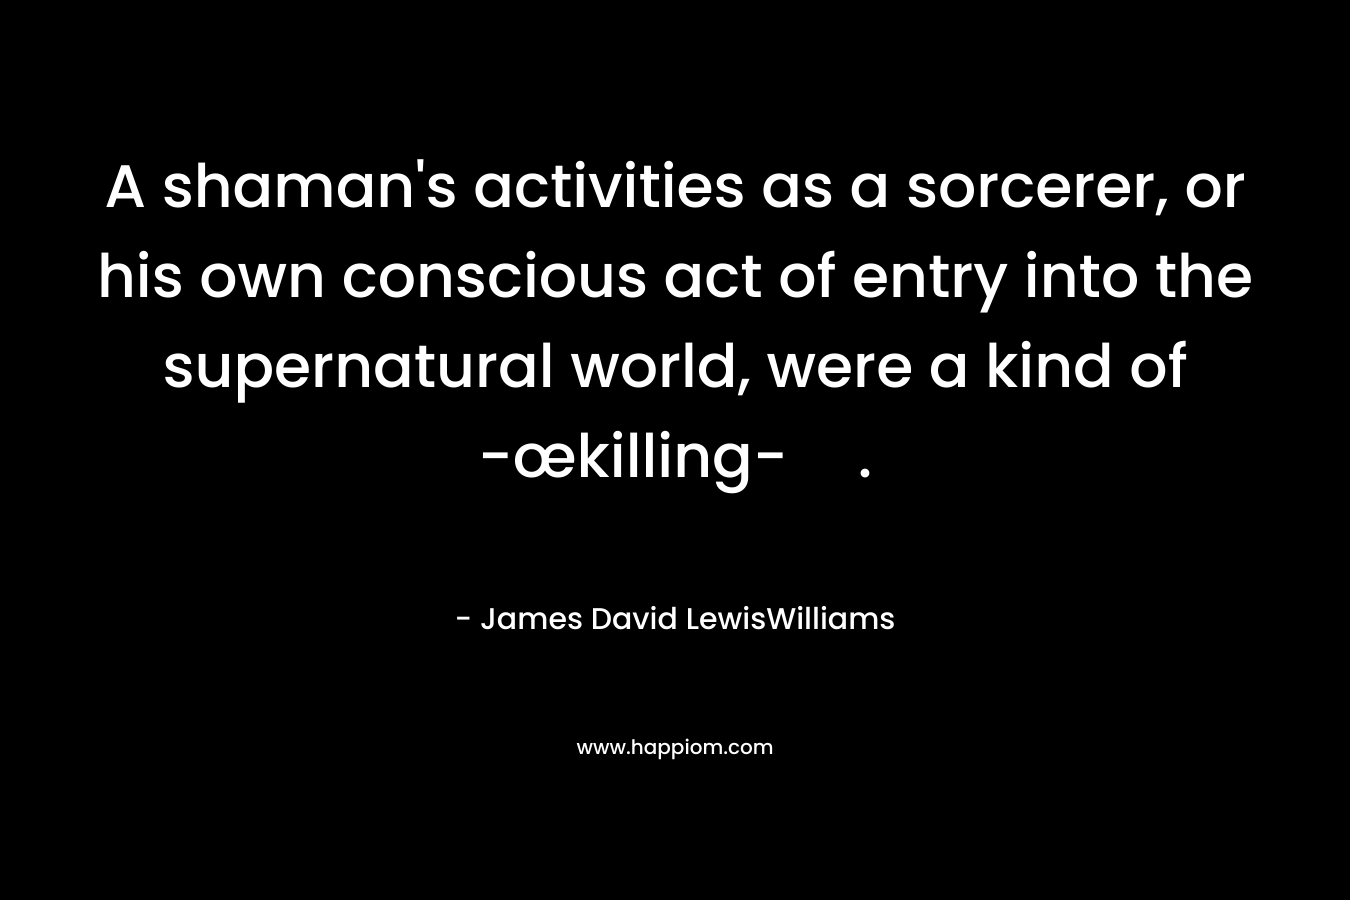 A shaman’s activities as a sorcerer, or his own conscious act of entry into the supernatural world, were a kind of -œkilling-. – James David LewisWilliams